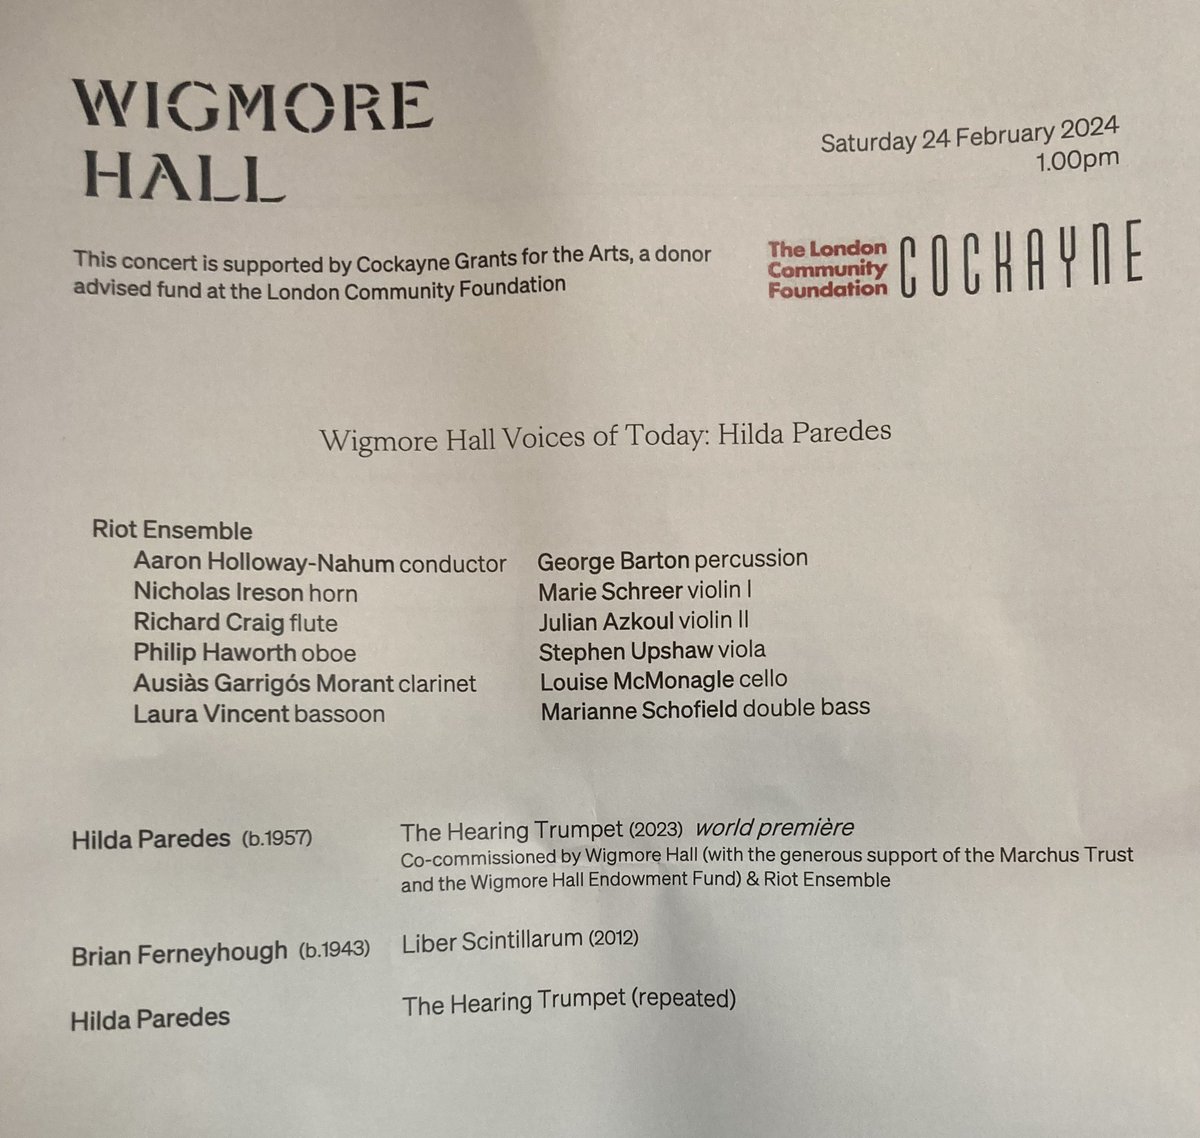 Applause after the second performance of Hilda Paredes’ The Hearing Trumpet. No 🎺 , rather fabulous imaginative sonorities - loved the brushing/temple block central section. Bravo @RiotEns @wigmore_hall & I enjoyed the Ferneyhough too